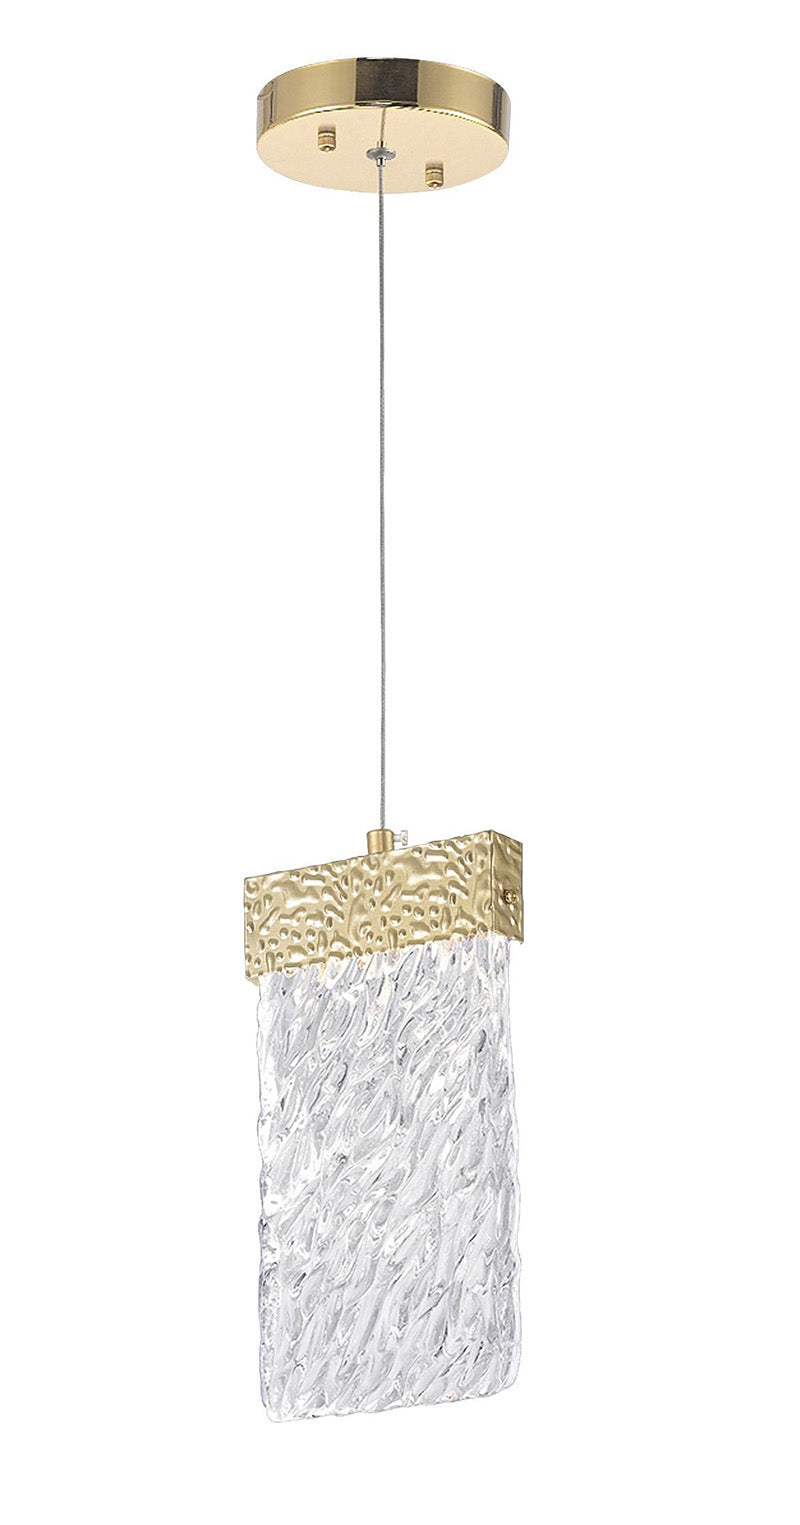 LED PENDANT WITH GOLD LEAF FINISH - Dreamart Gallery